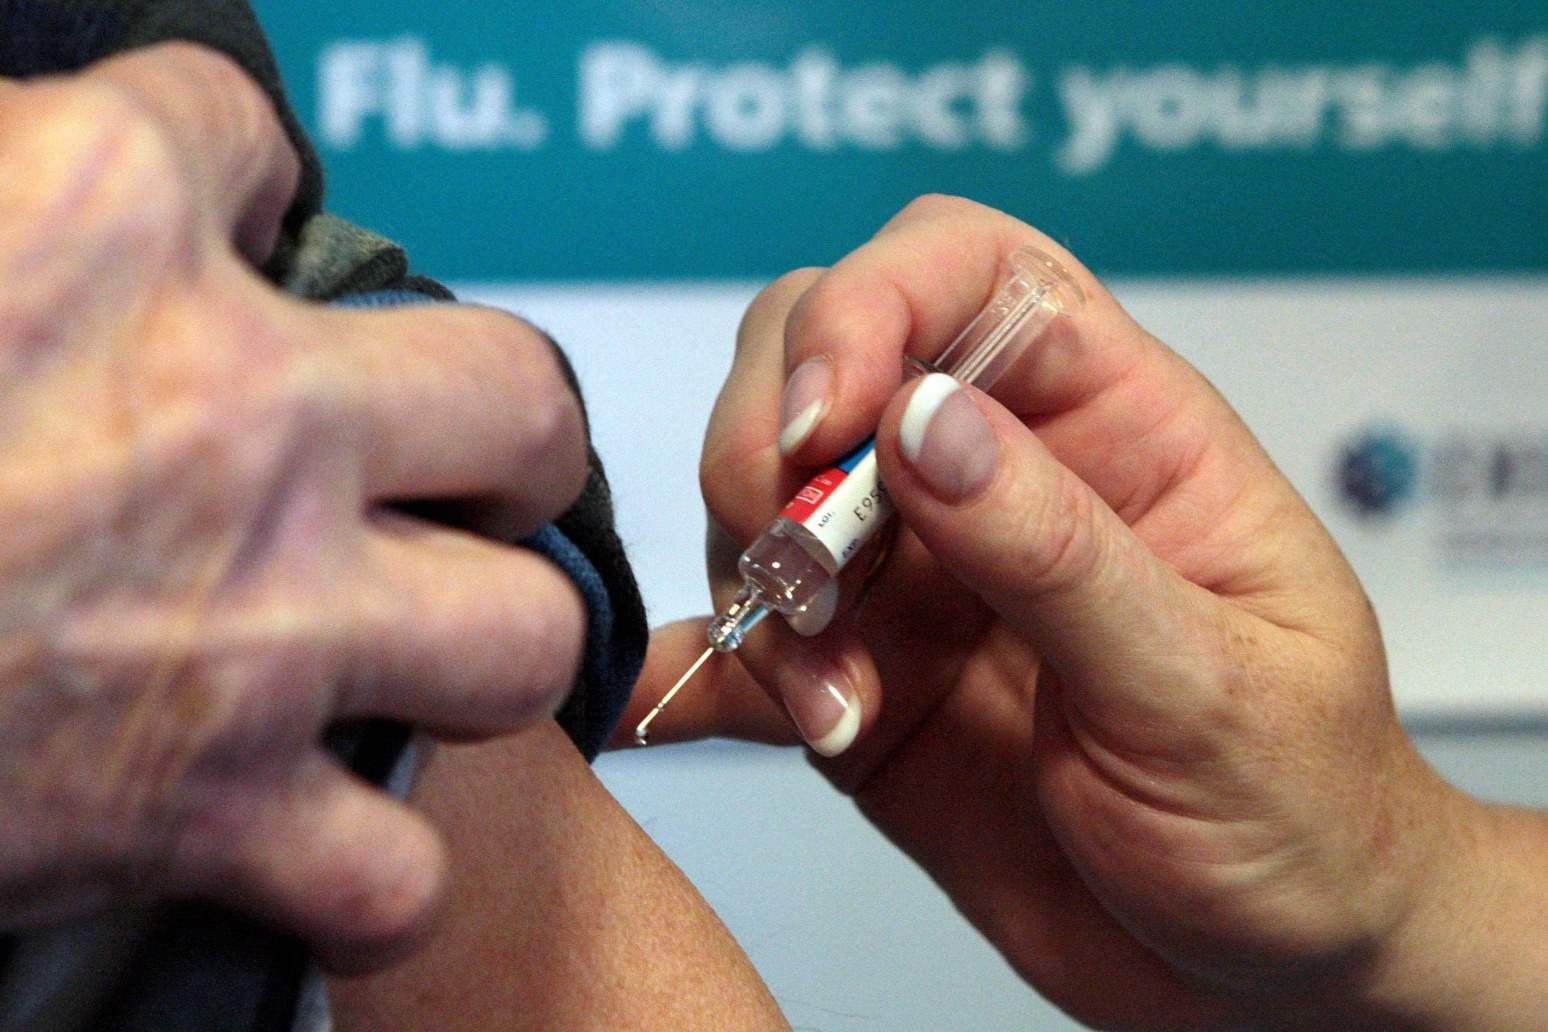 More than a third of 12 to 15-year-olds vaccinated in Scotland, figures show 